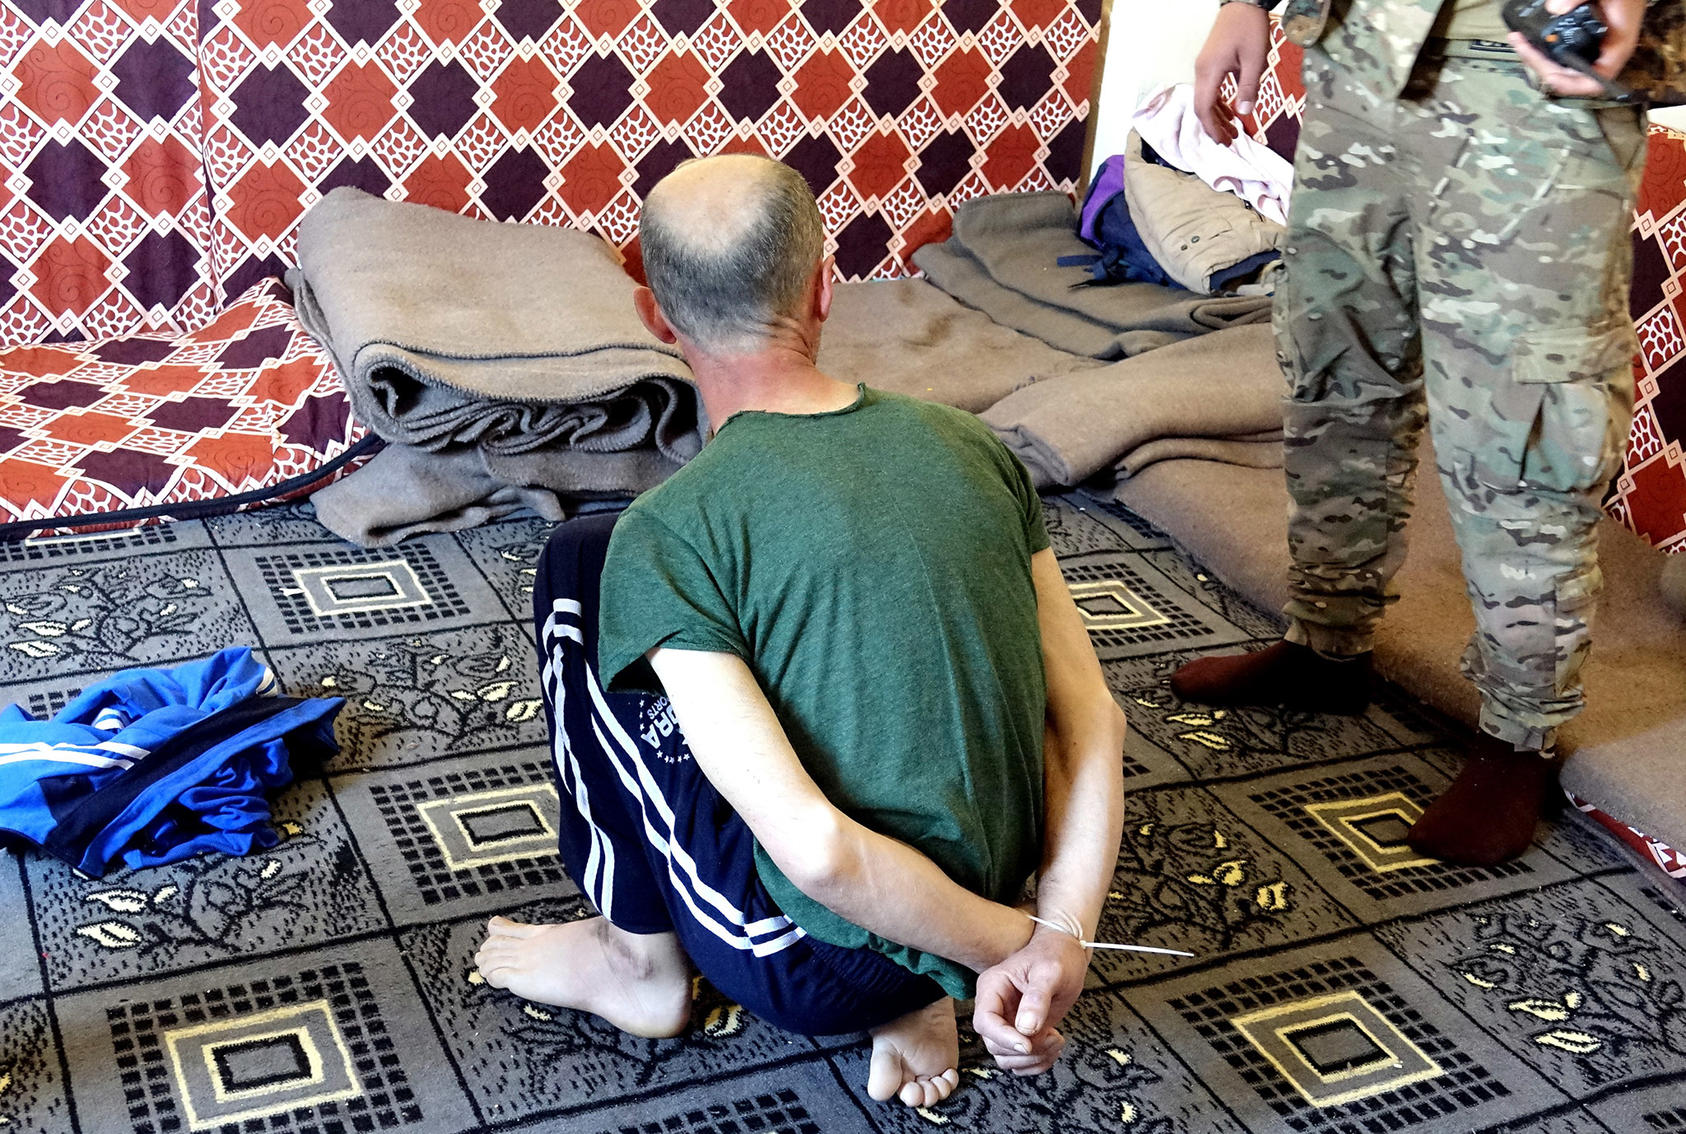 An American ISIS member who surrendered to the Syrian Democratic Forces waits to be interviewed at a makeshift prison at Dashisha, Syria. (Photo credit: Robin Wright/USIP)